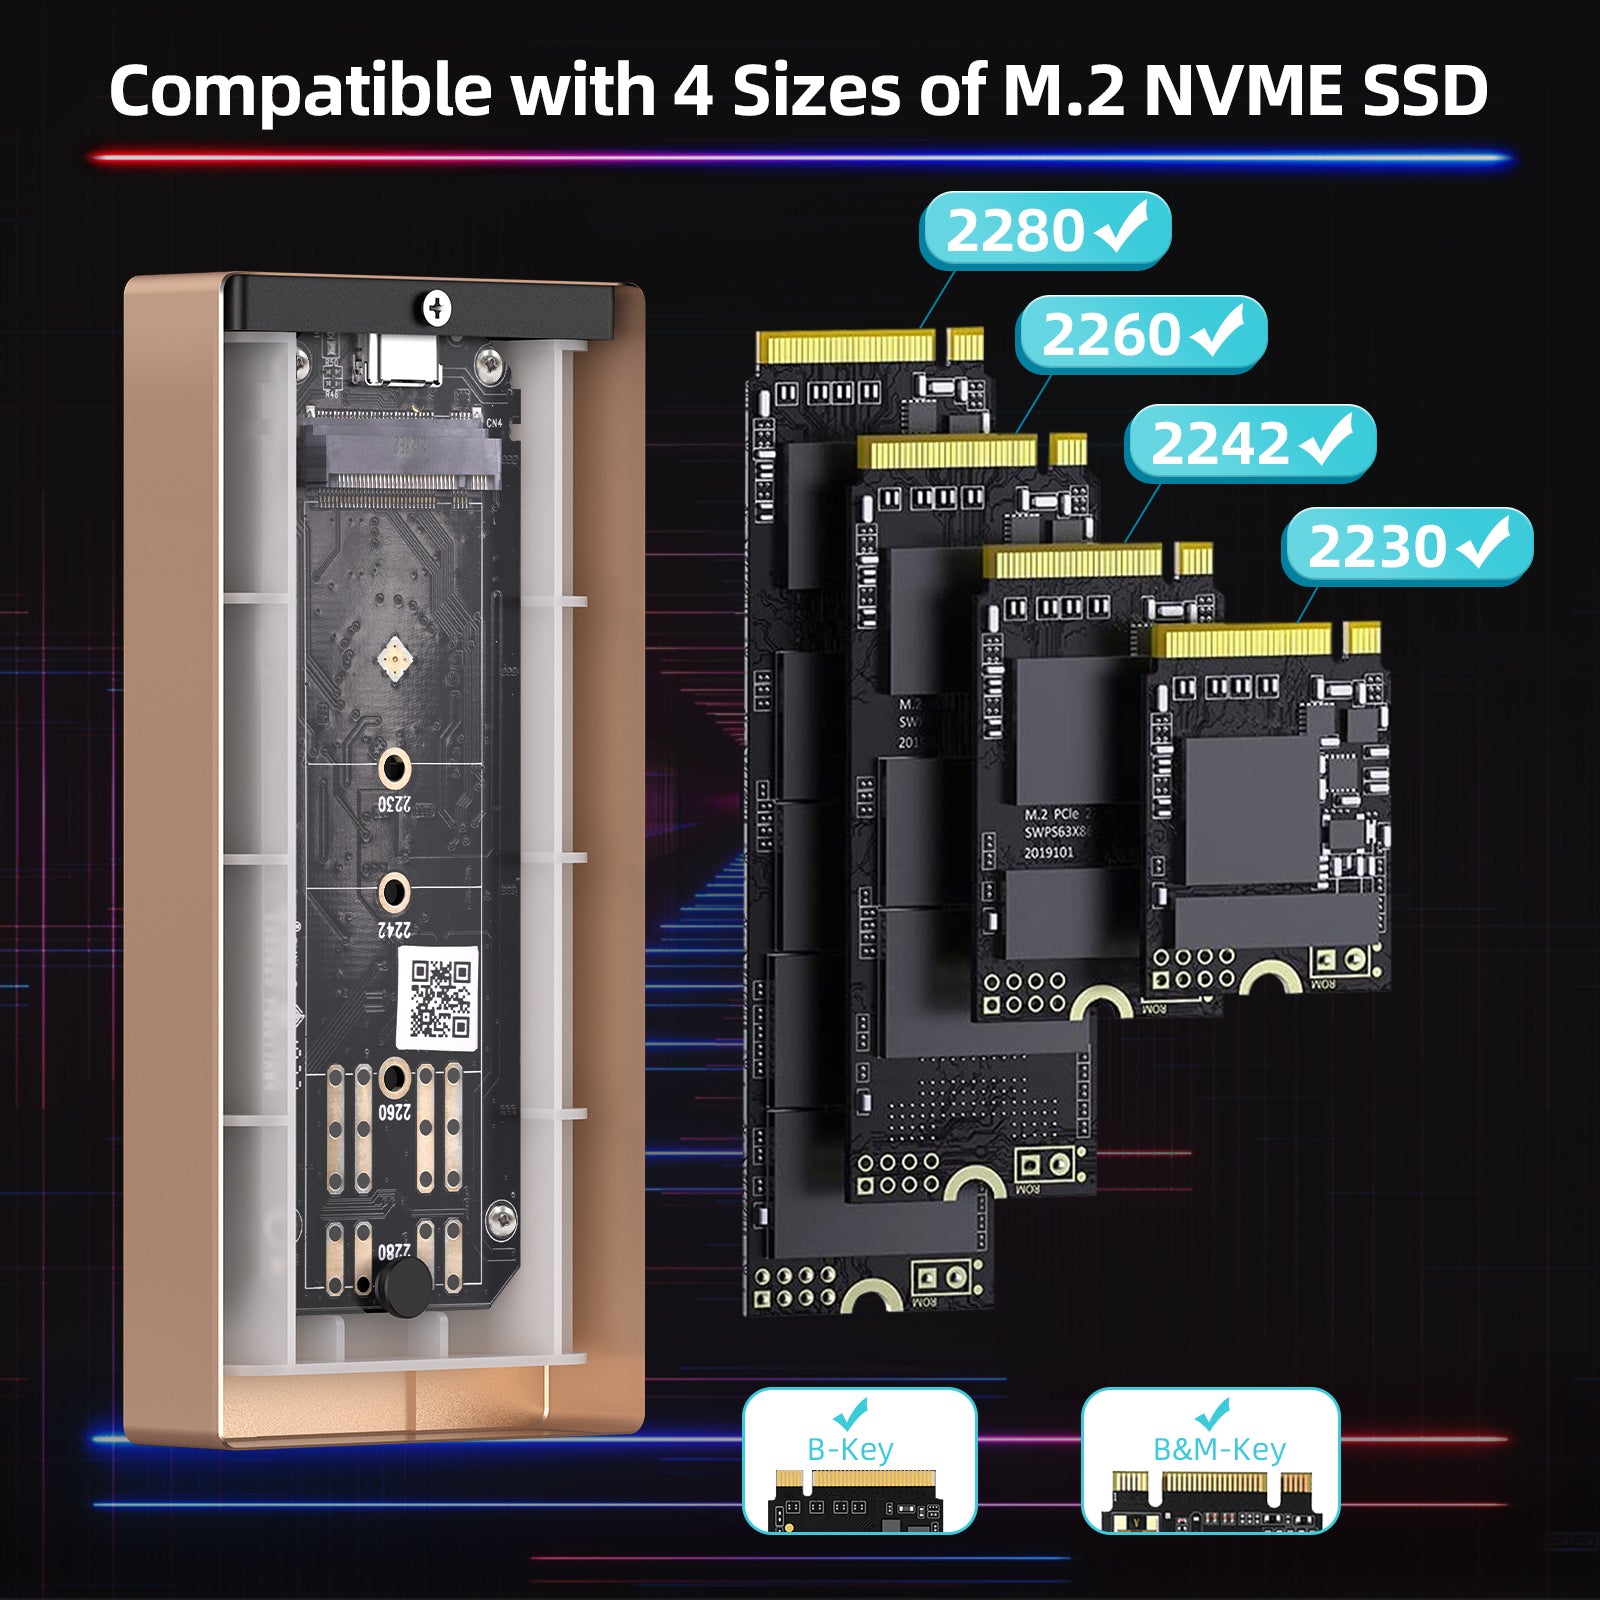 M.2 NVME SSD Enclosure for Gaming, USB 3.1 Gen 2(10 Gbps) Type C to NGFF NVME PCIe M-Key(B&M Key) External Solid State Drive Enclosure, Support UASP Trim for SSDs Size 2280/2260/2242/2230